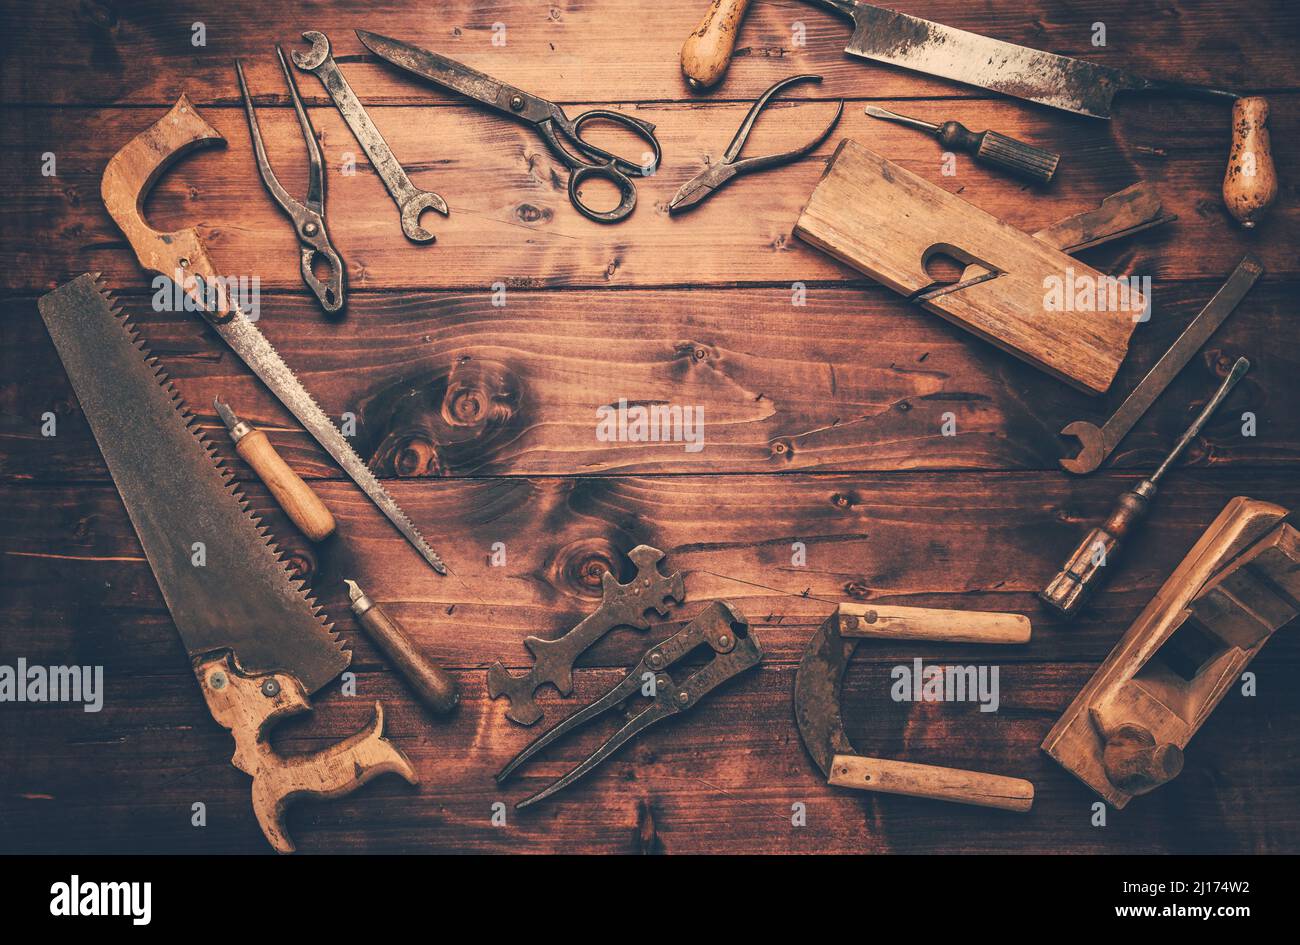 Assortment of old and rusty tools in workshop in vintage look Stock Photo